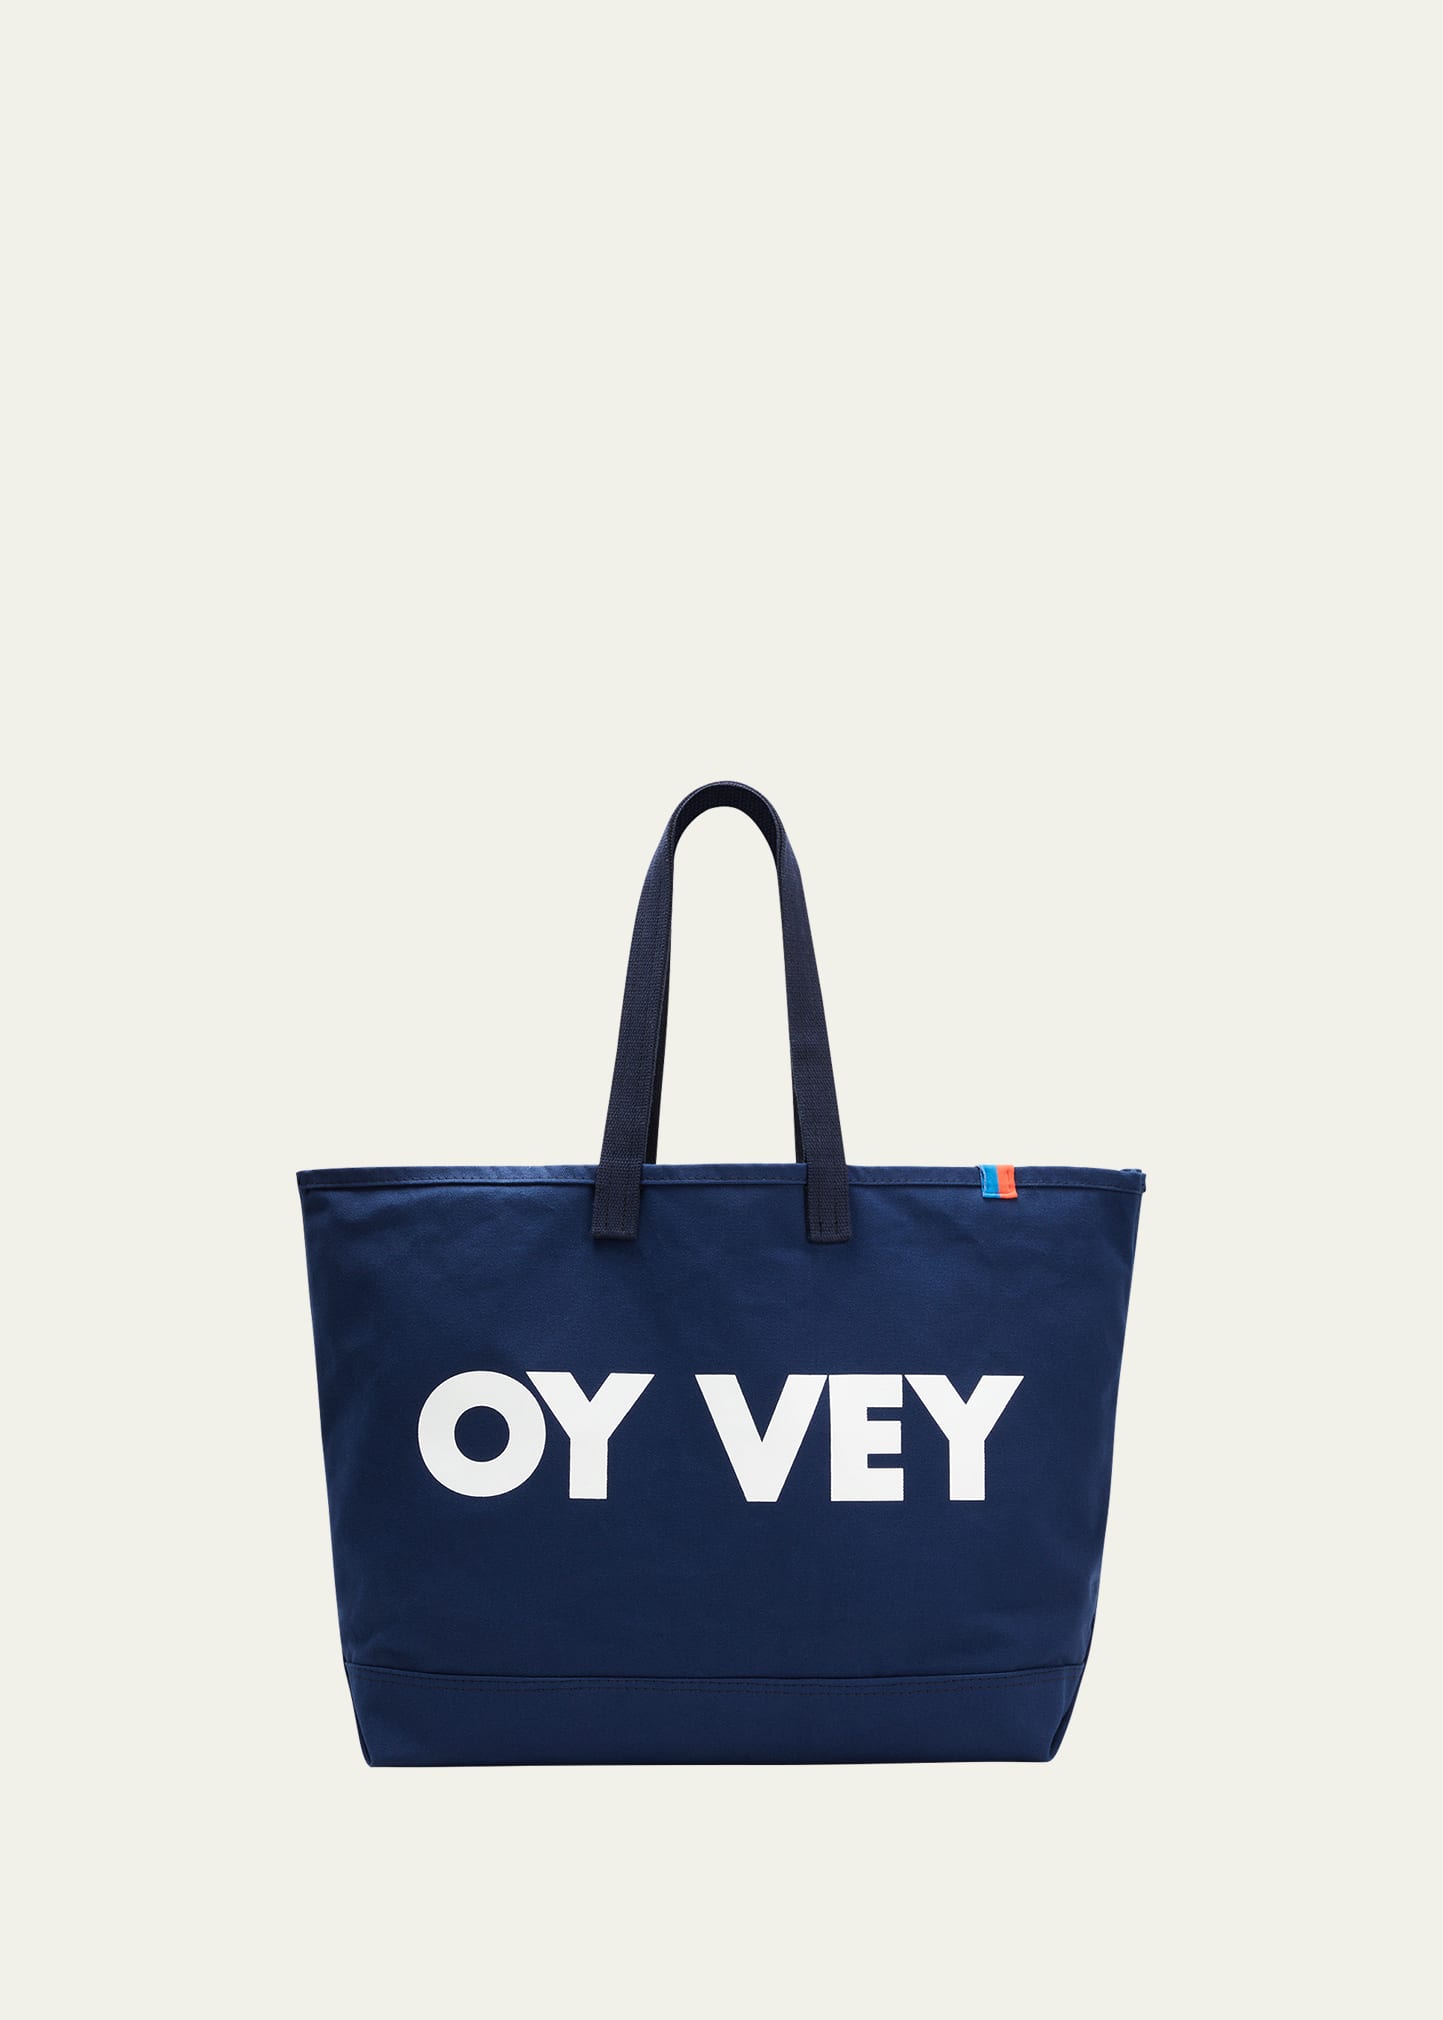 The Over The Shoulder Oy Vey Tote Bag